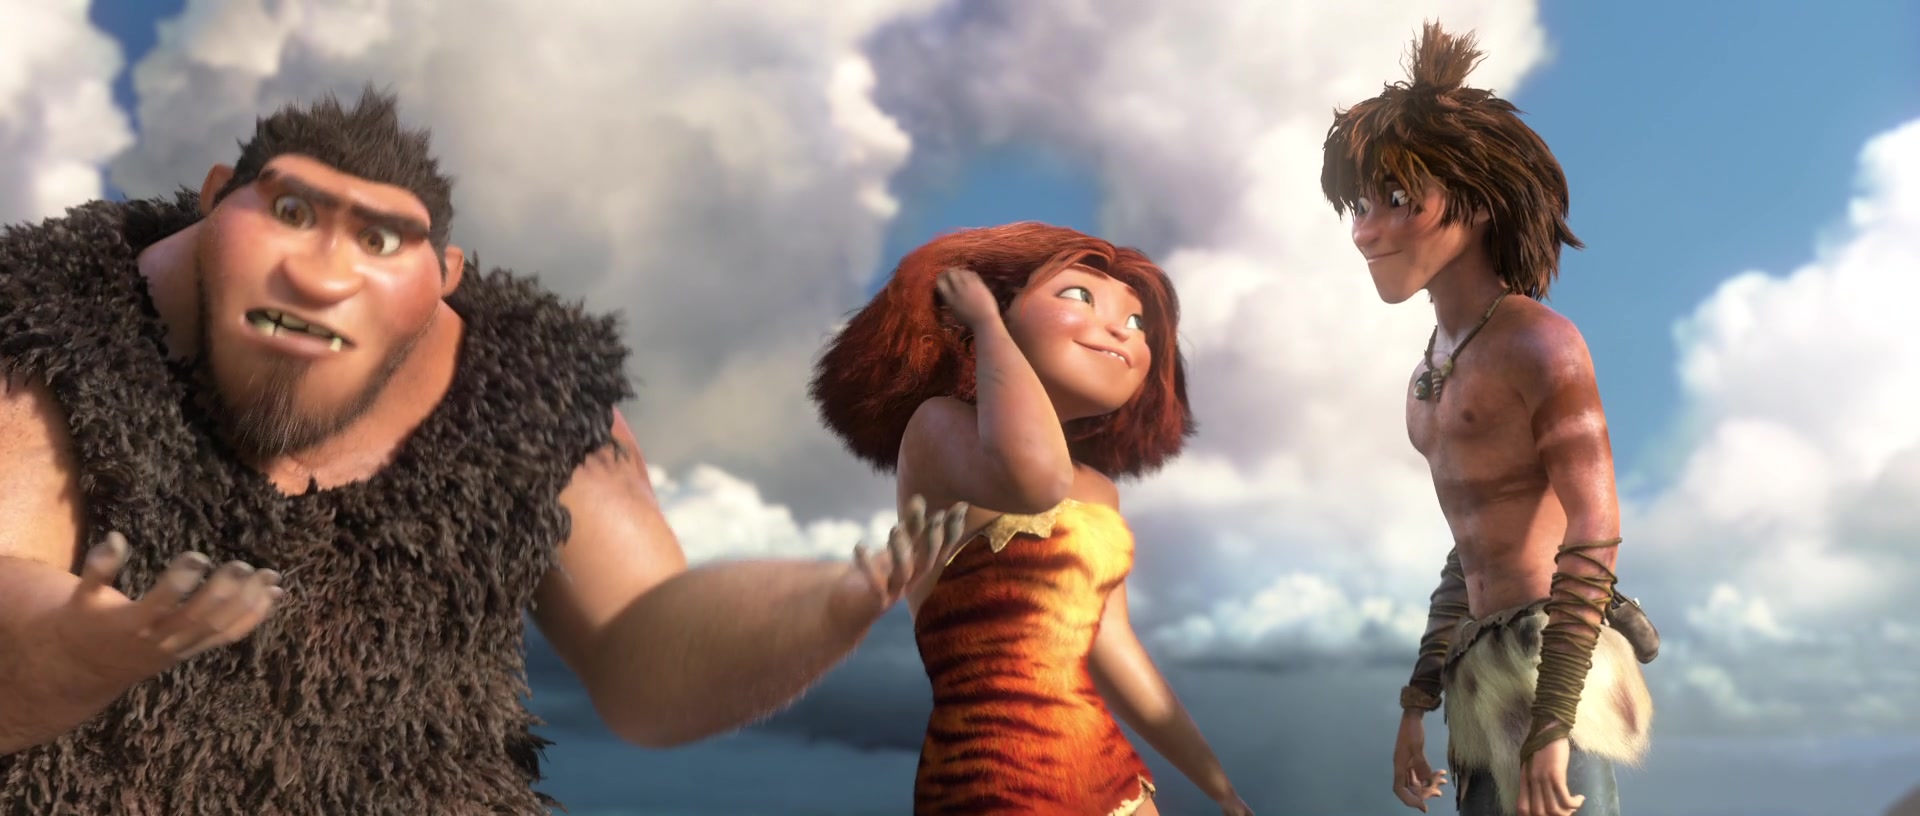 ...Fancaps.net/movies/MovieImages.php?name=The_Croods&movieid=61"....